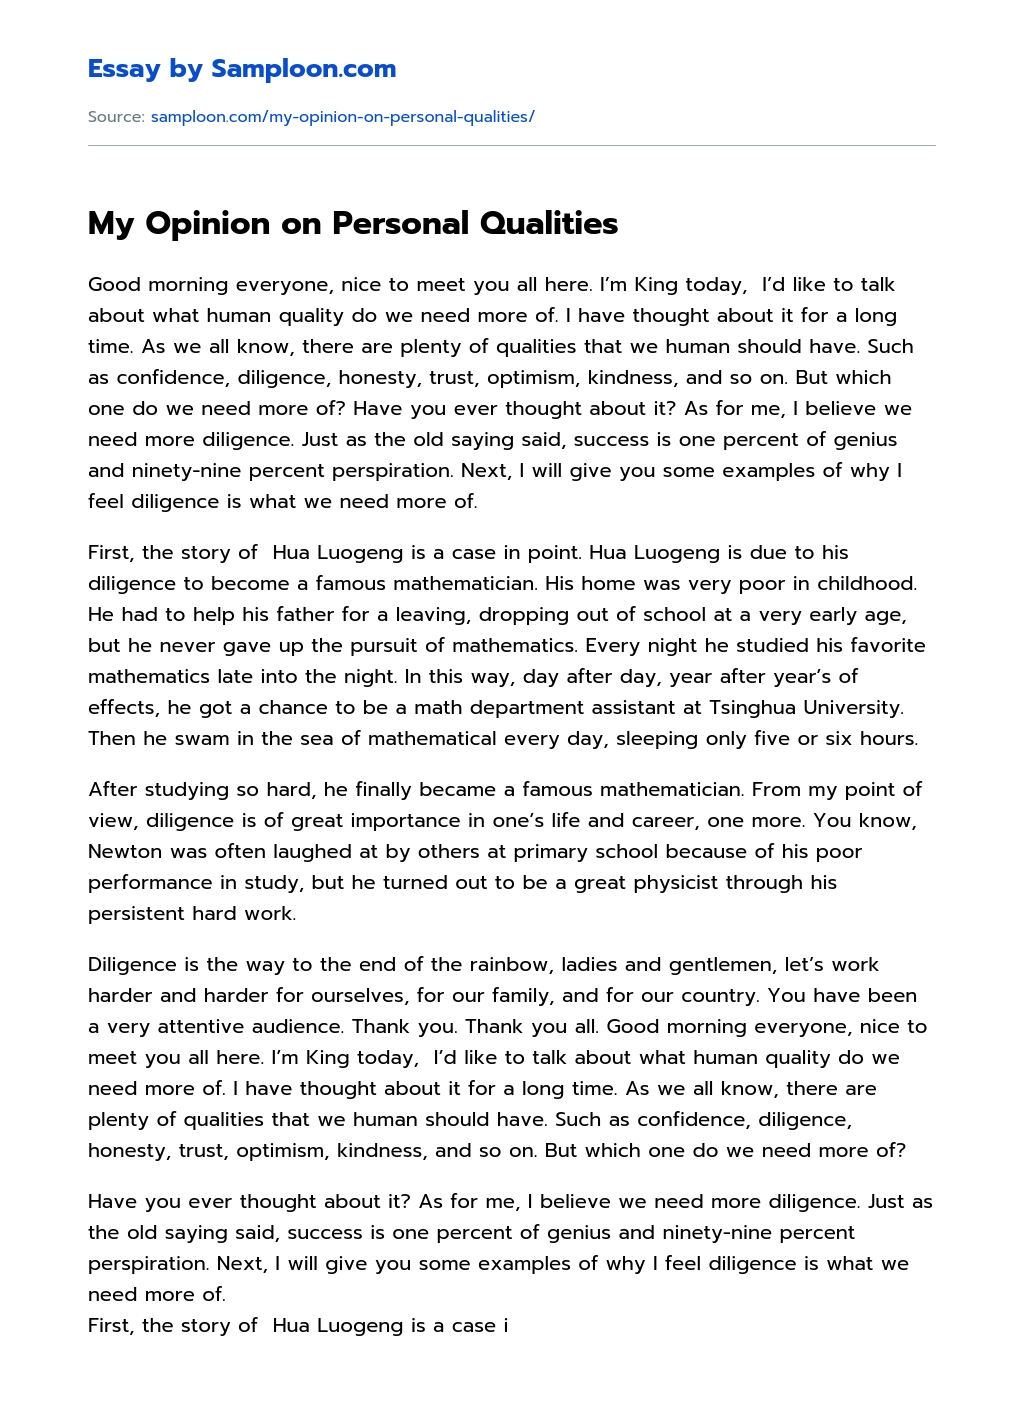 My Opinion on Personal Qualities essay